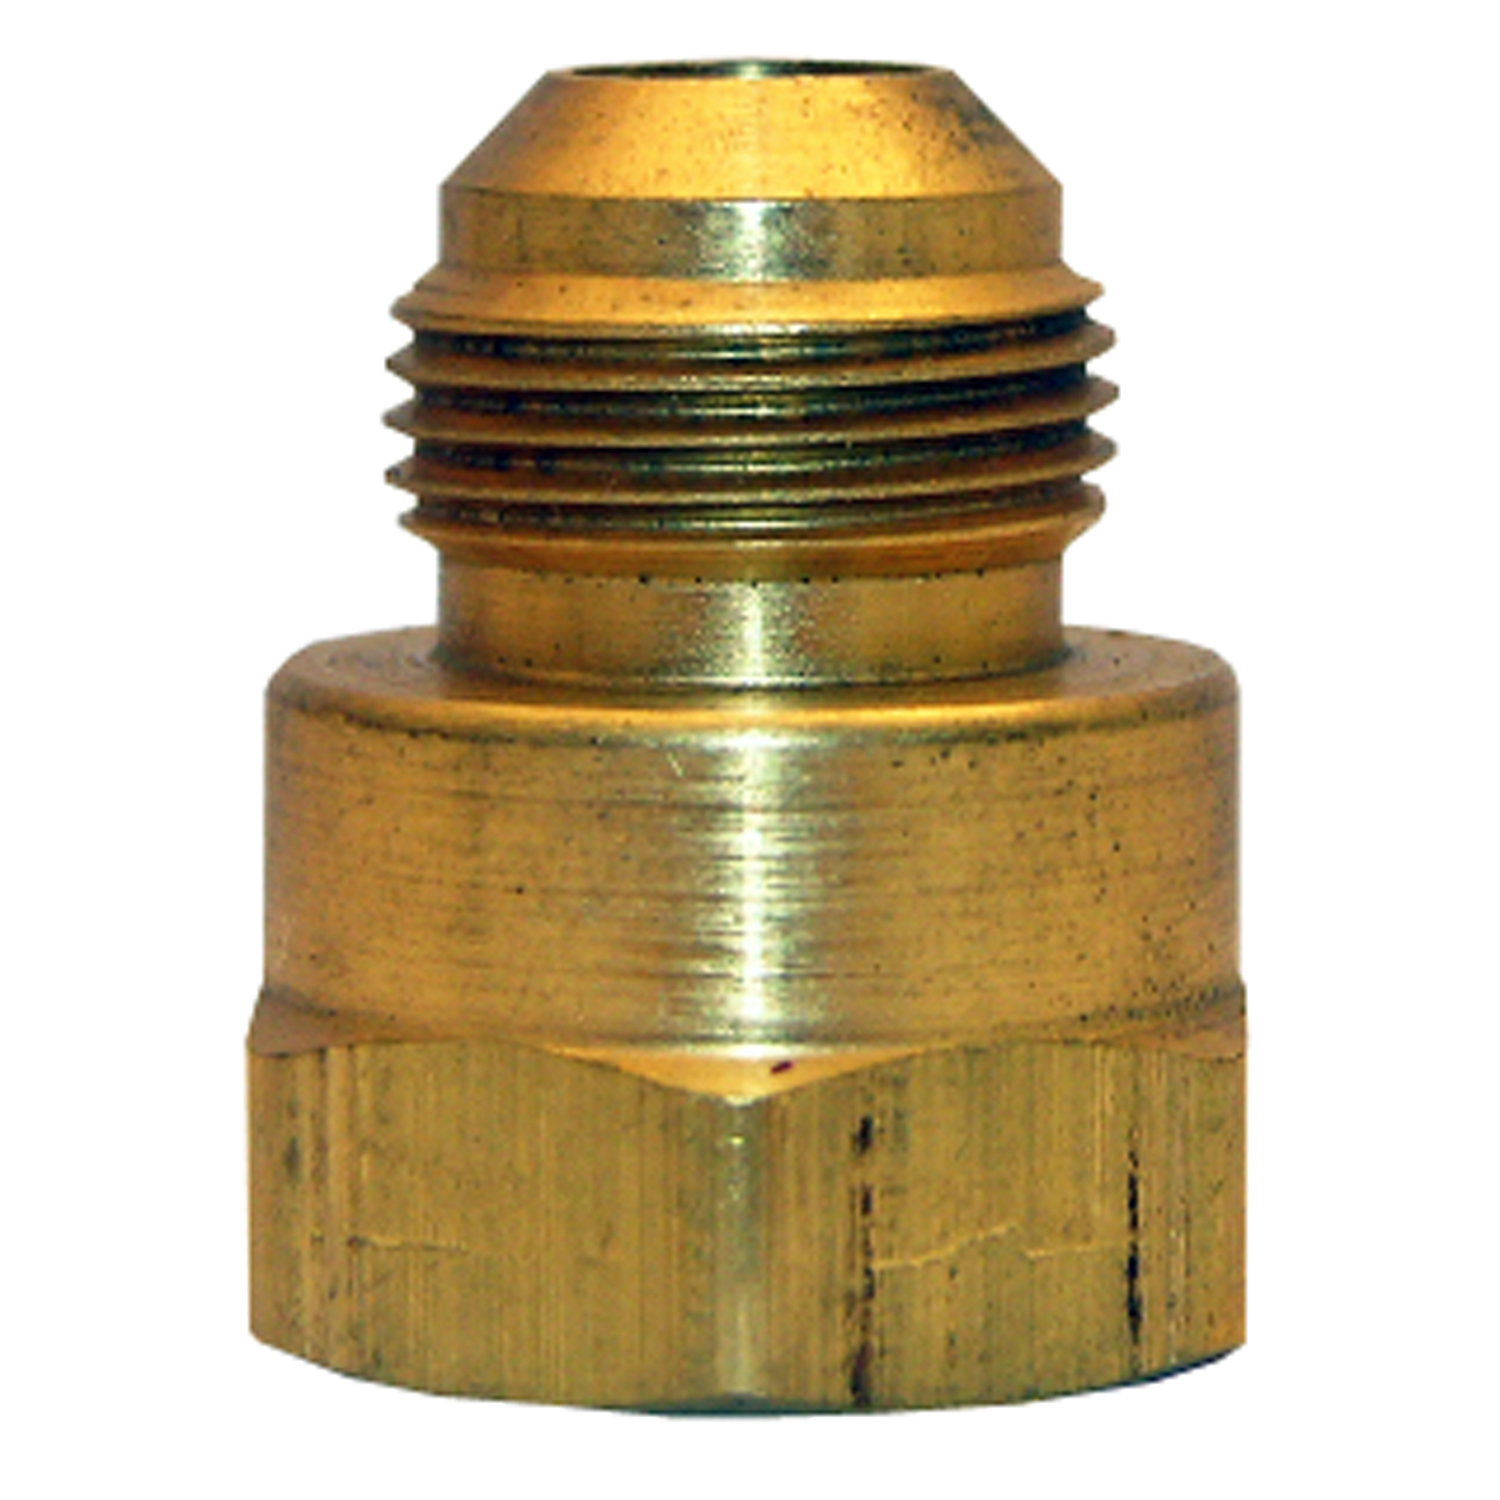 17-4673 Pipe Adapter, 3/8 x 1/2 in, Male Flare x FPT, Brass, 900 psi Pressure